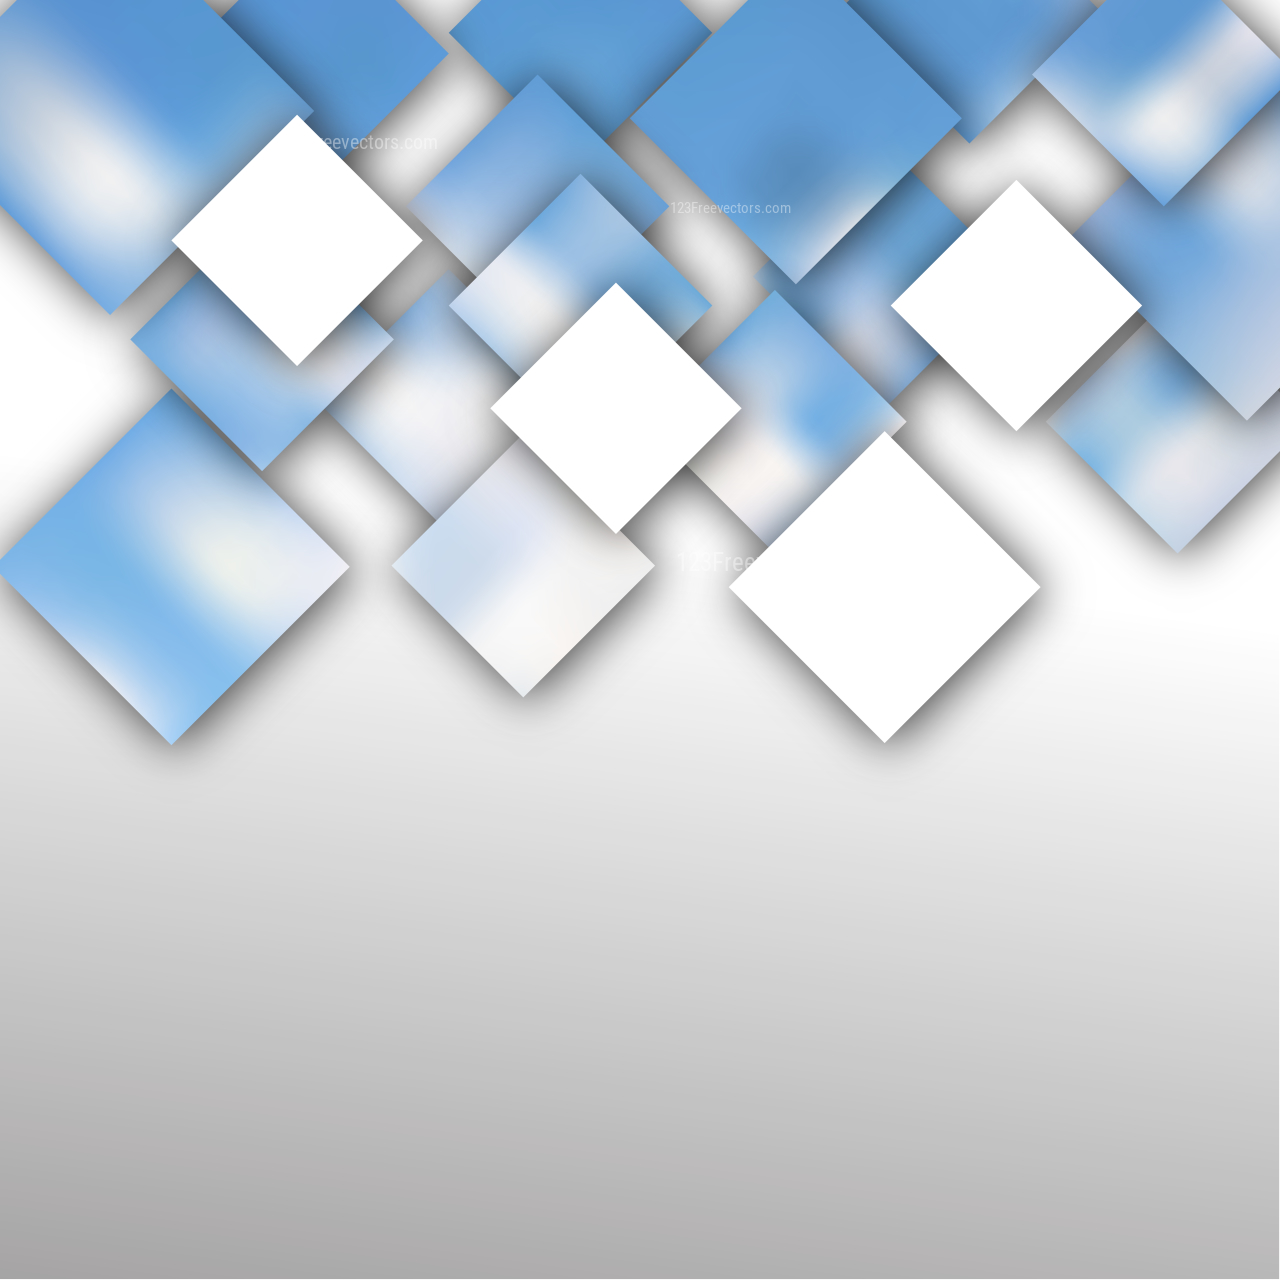 Abstract Blue And White Square Background Vector Illustration